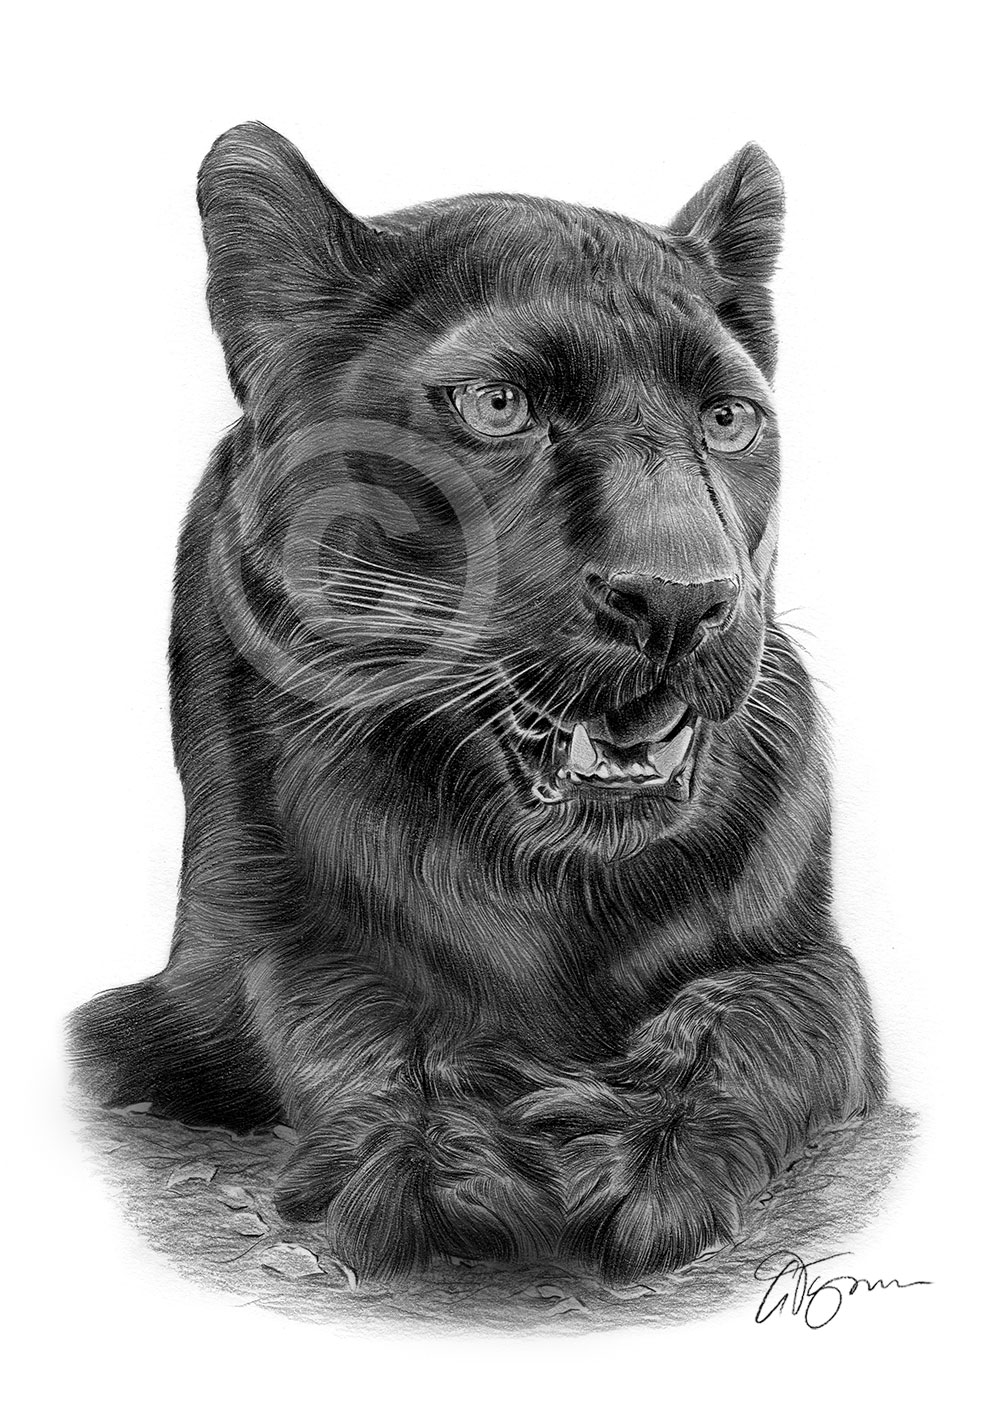 Pencil drawing of a young black panther by artist Gary Tymon